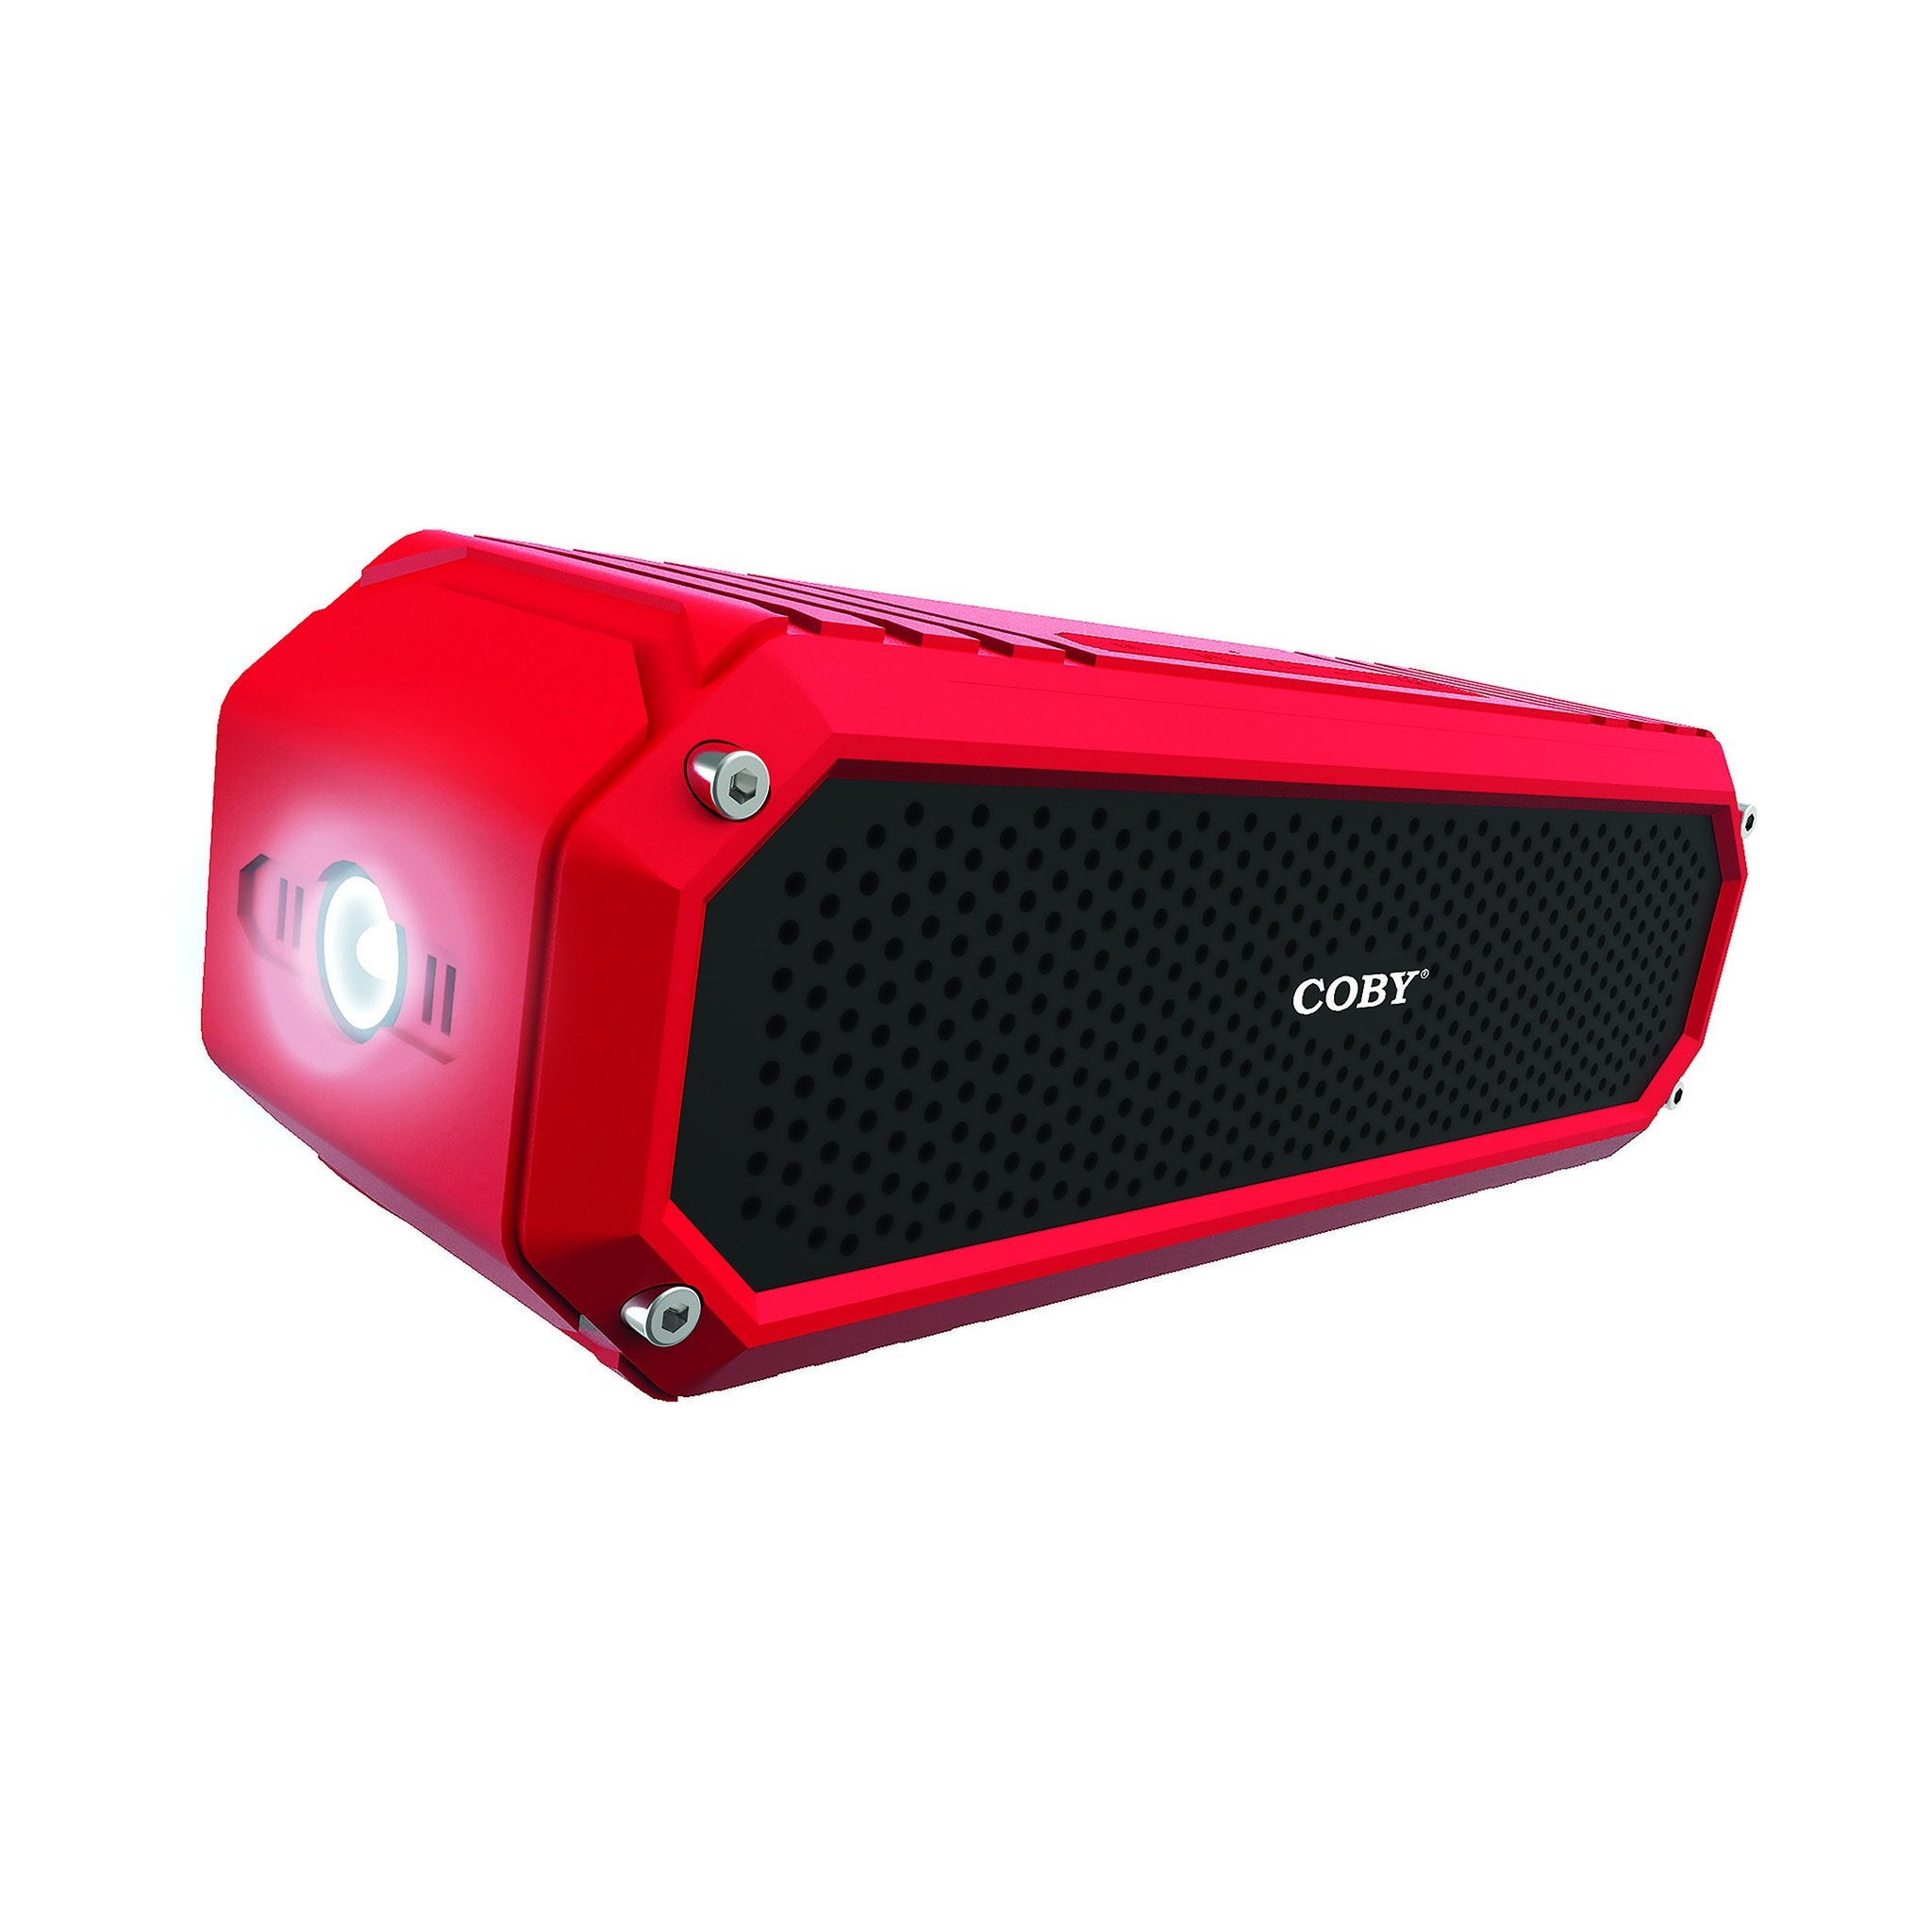 Rugged gear COBY water resistant bluetooth speaker